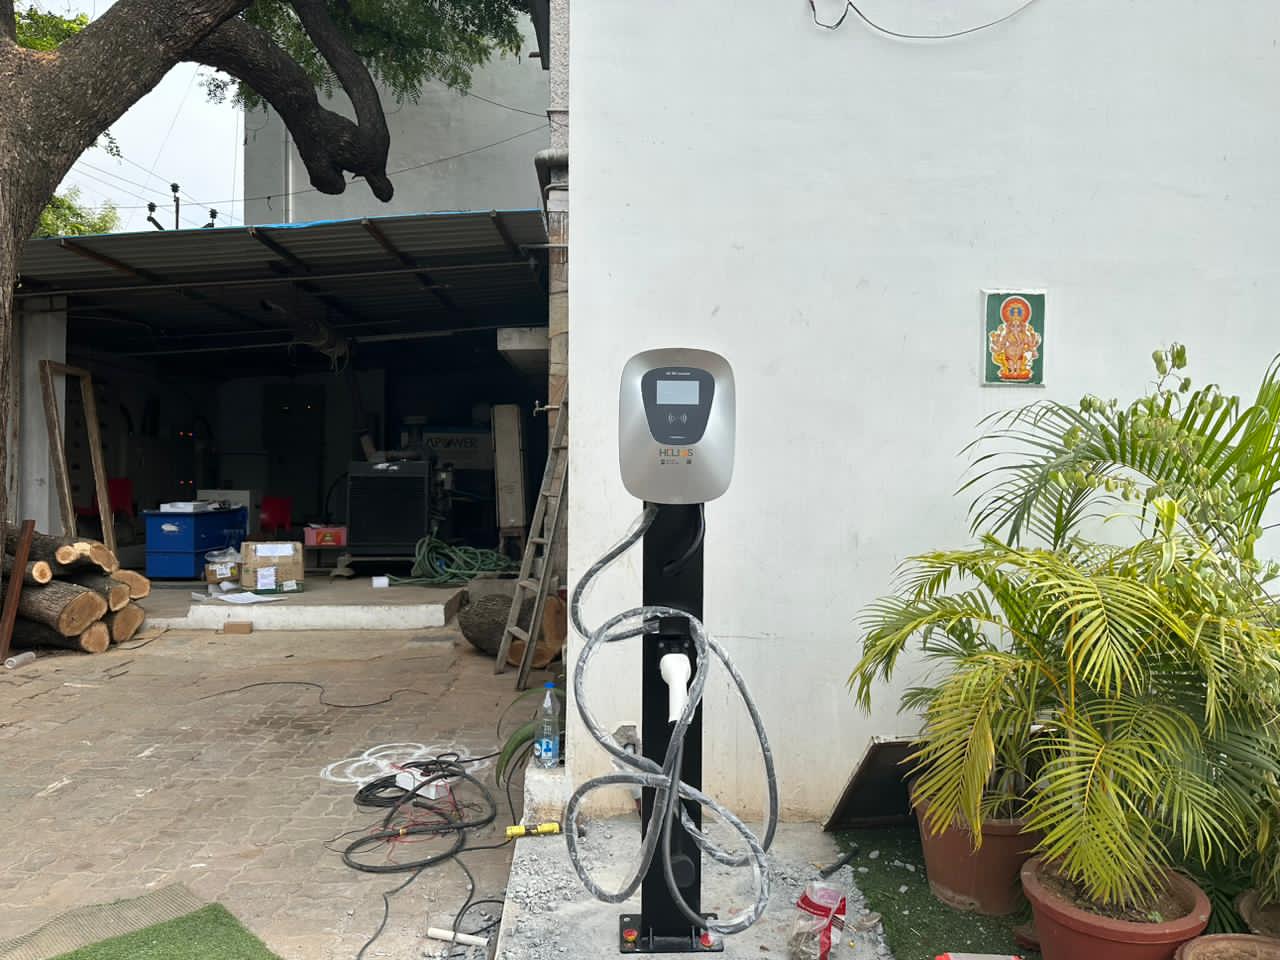 Electric vehicle charging station set up outdoors next to a white wall with religious iconography and green potted plants.